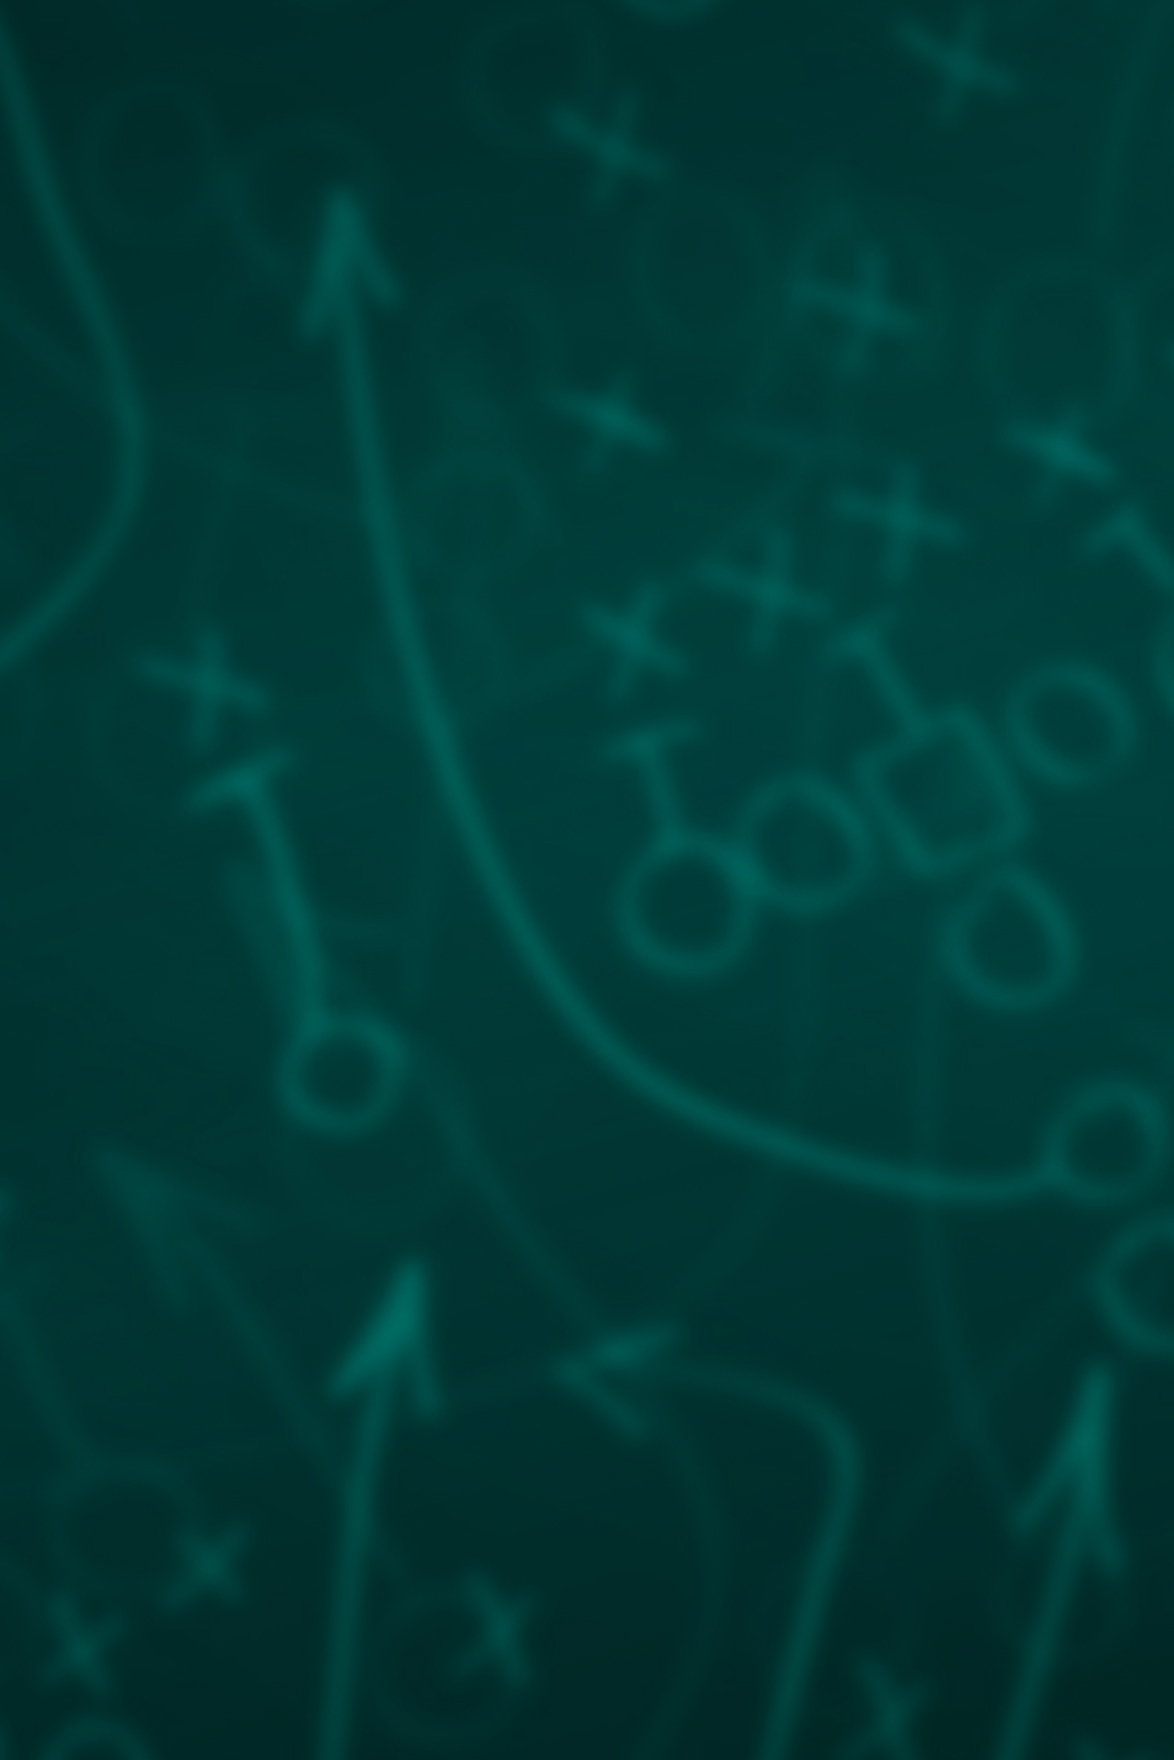 light green sport diagram of Xs and Ox on a green chalkboard background